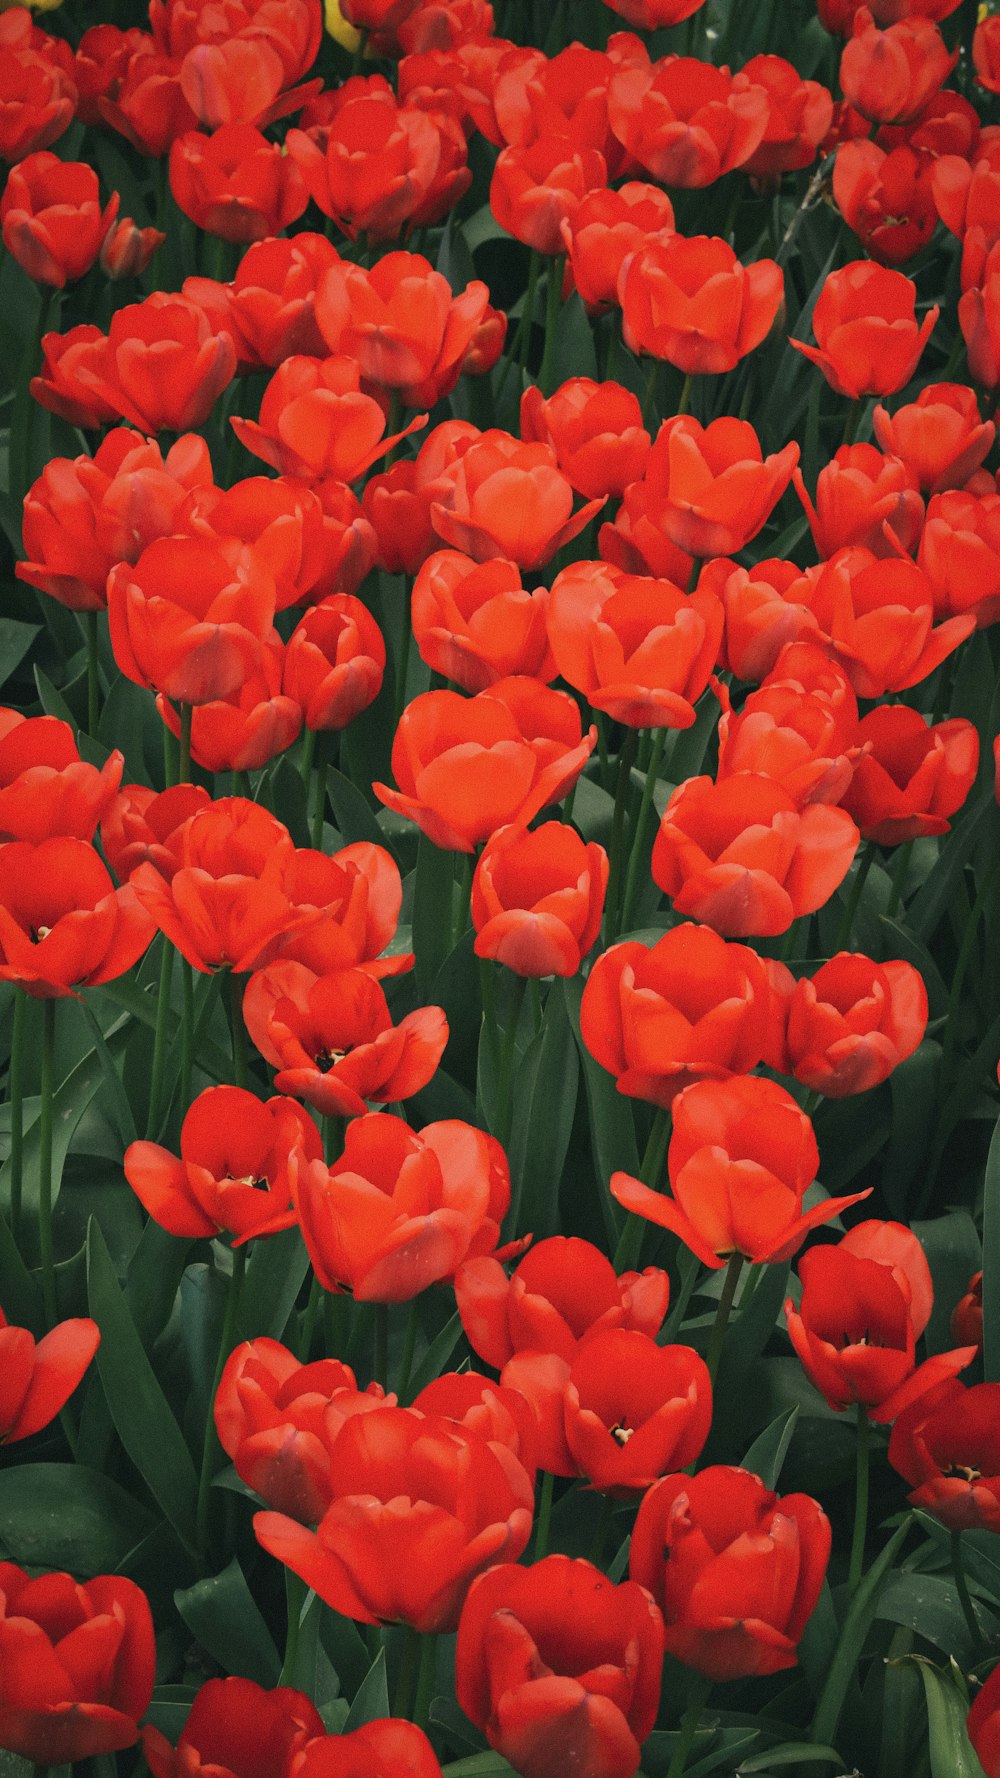 a field of red tulips in full bloom